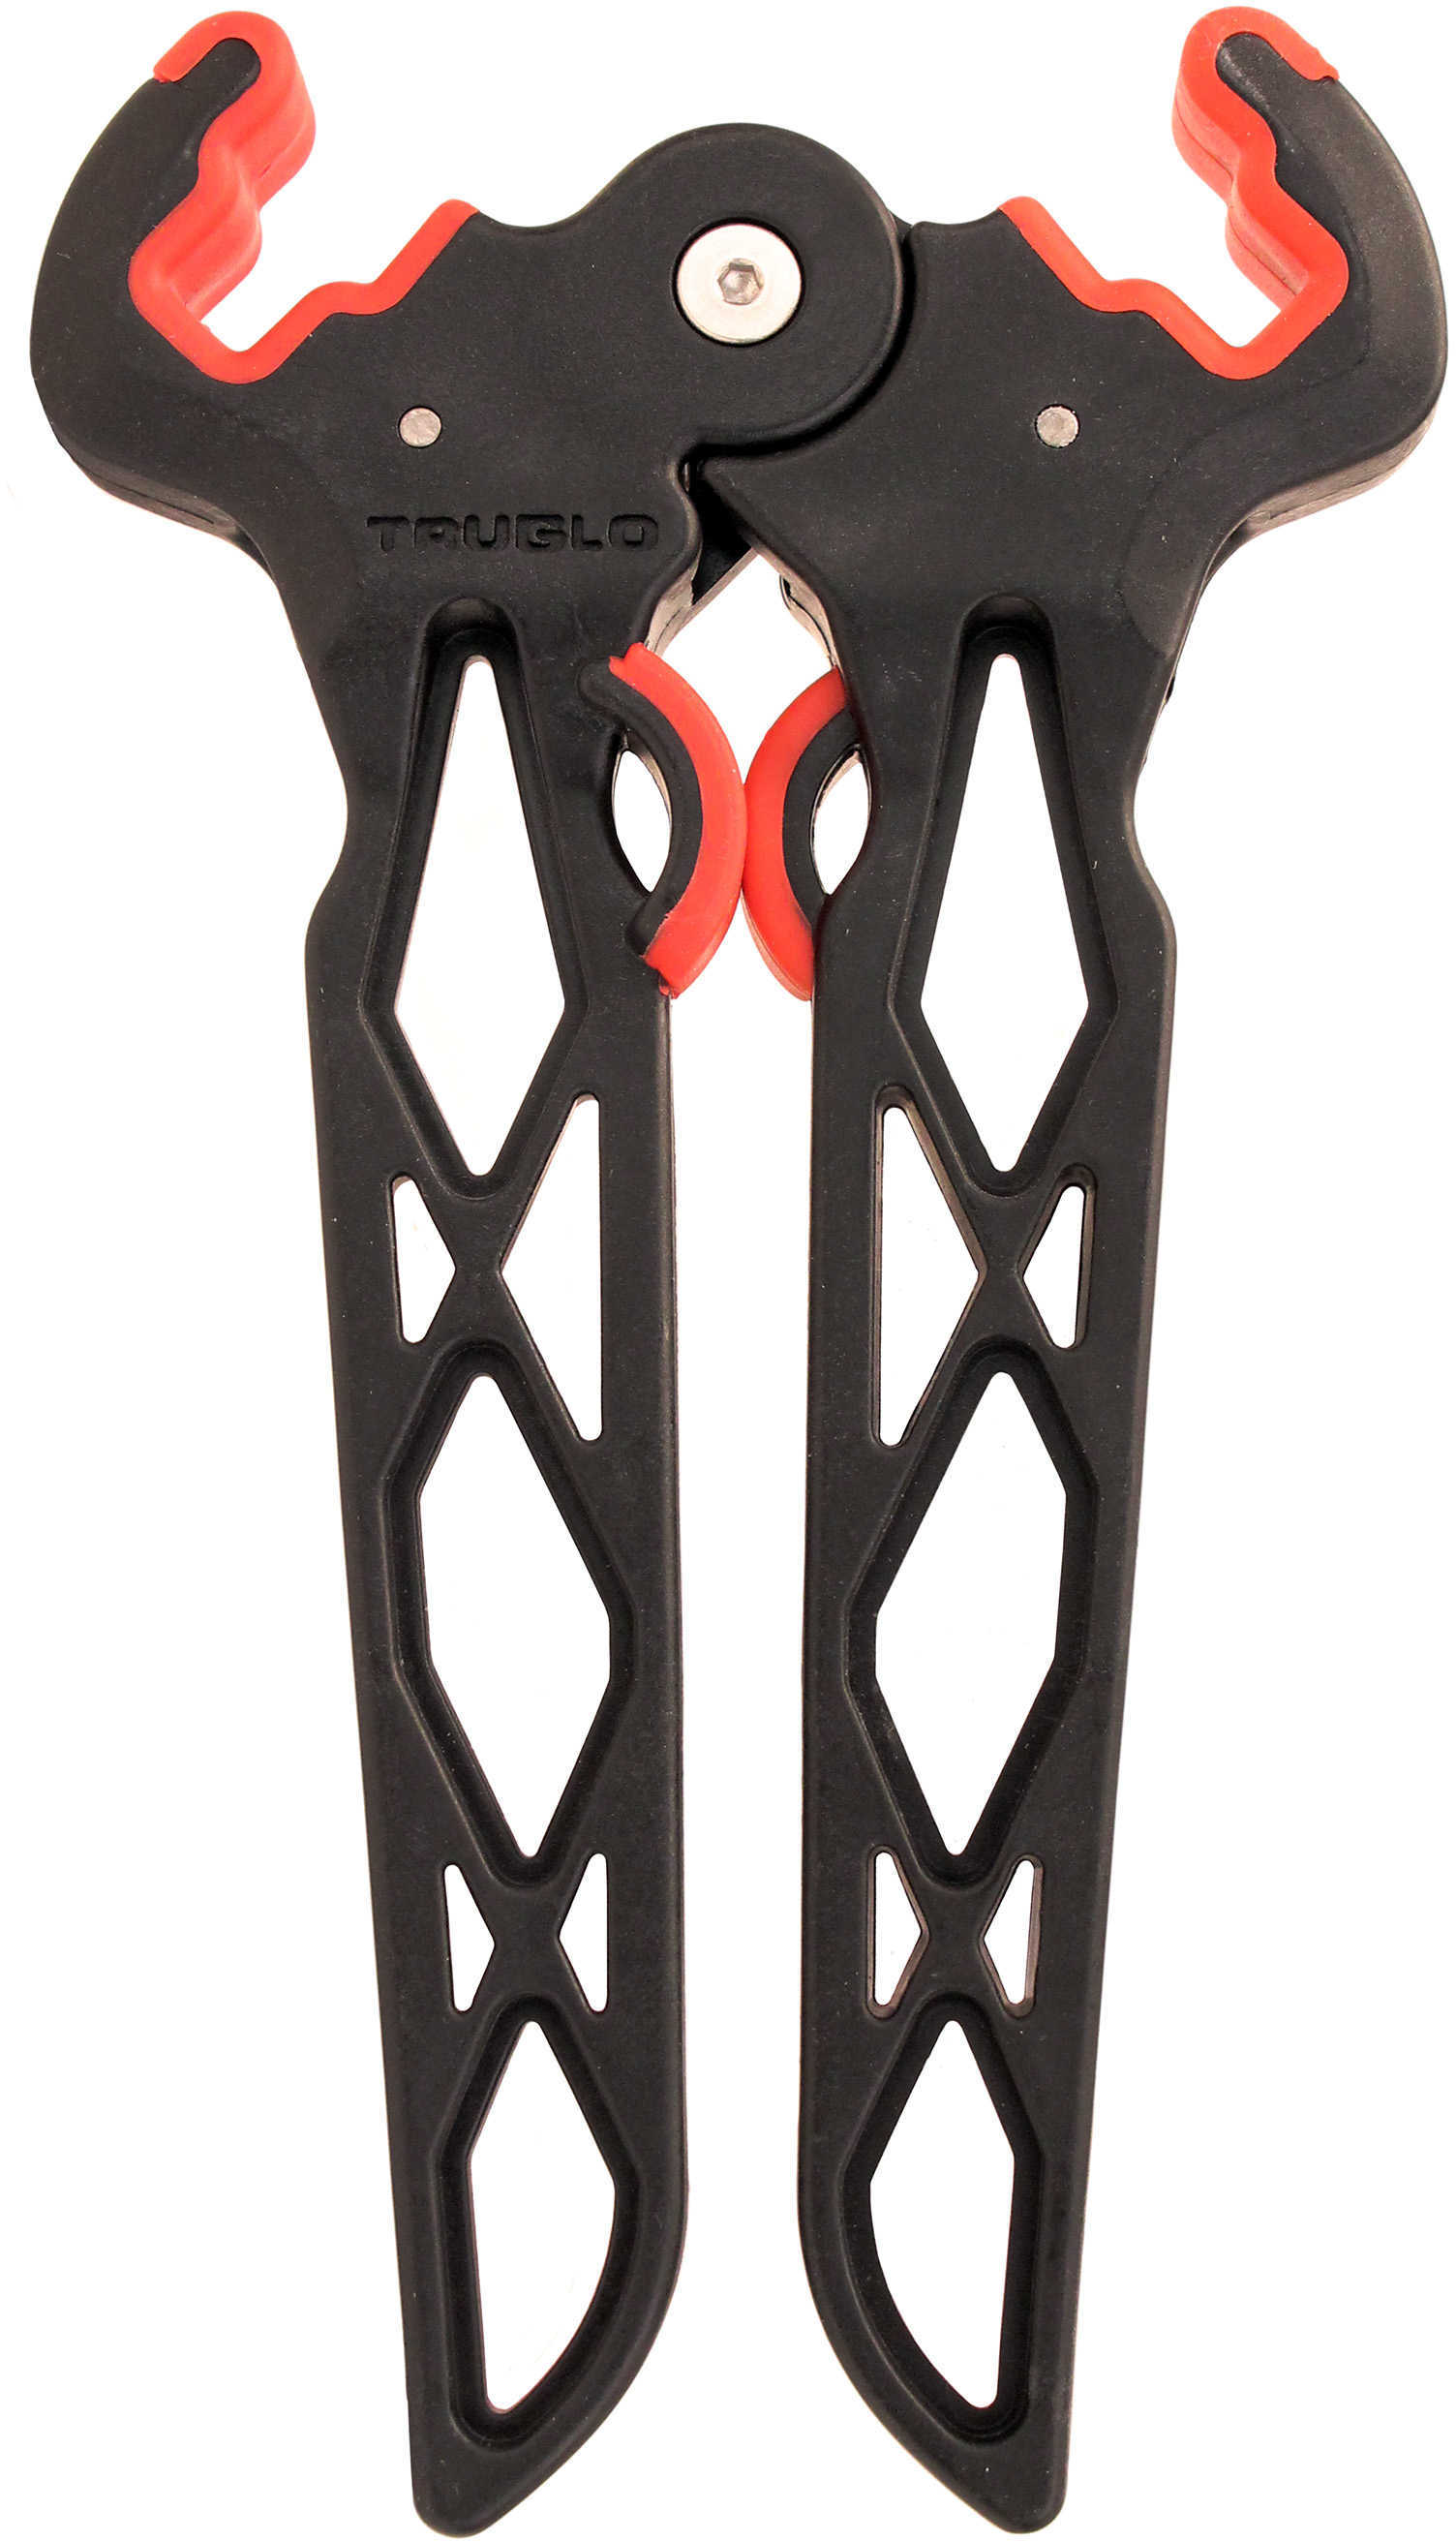 Truglo Bow Jack Stand Black / Red Model: TG395BR